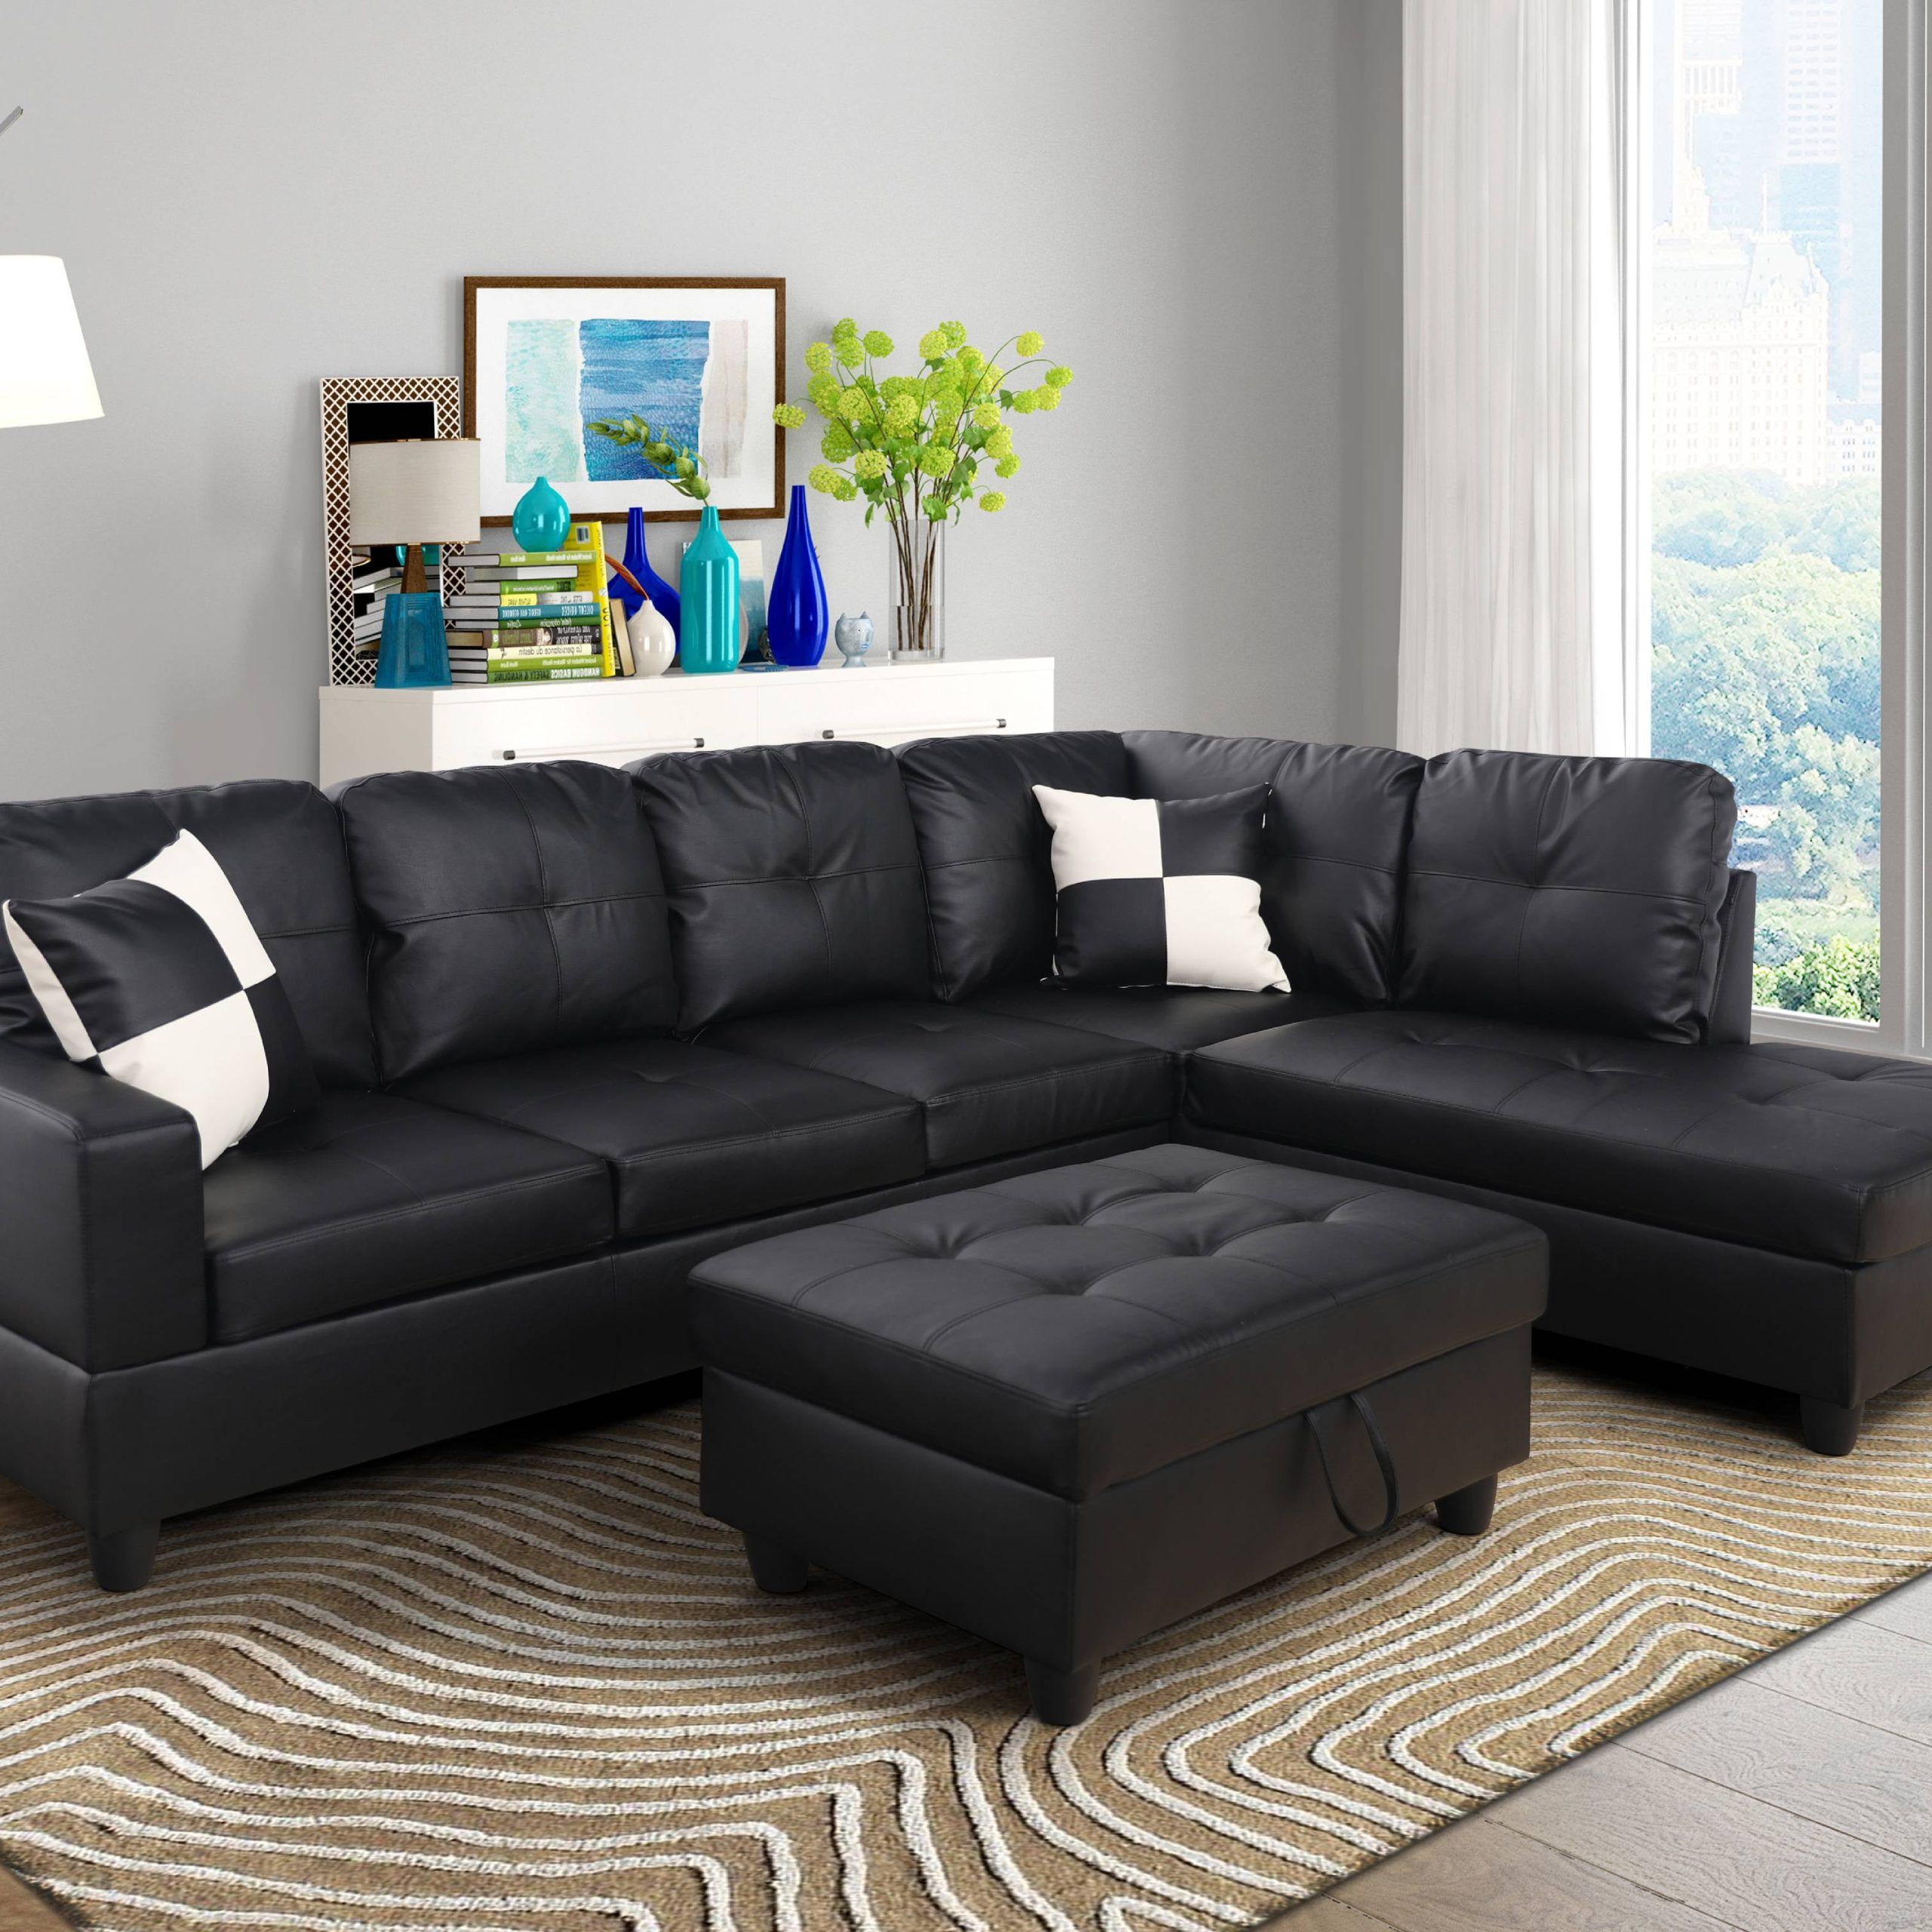 Aycp Furniture L Shape Sectional Sofa With Ottoman, Left Chaise, Black Intended For Sofas With Ottomans (Gallery 14 of 20)